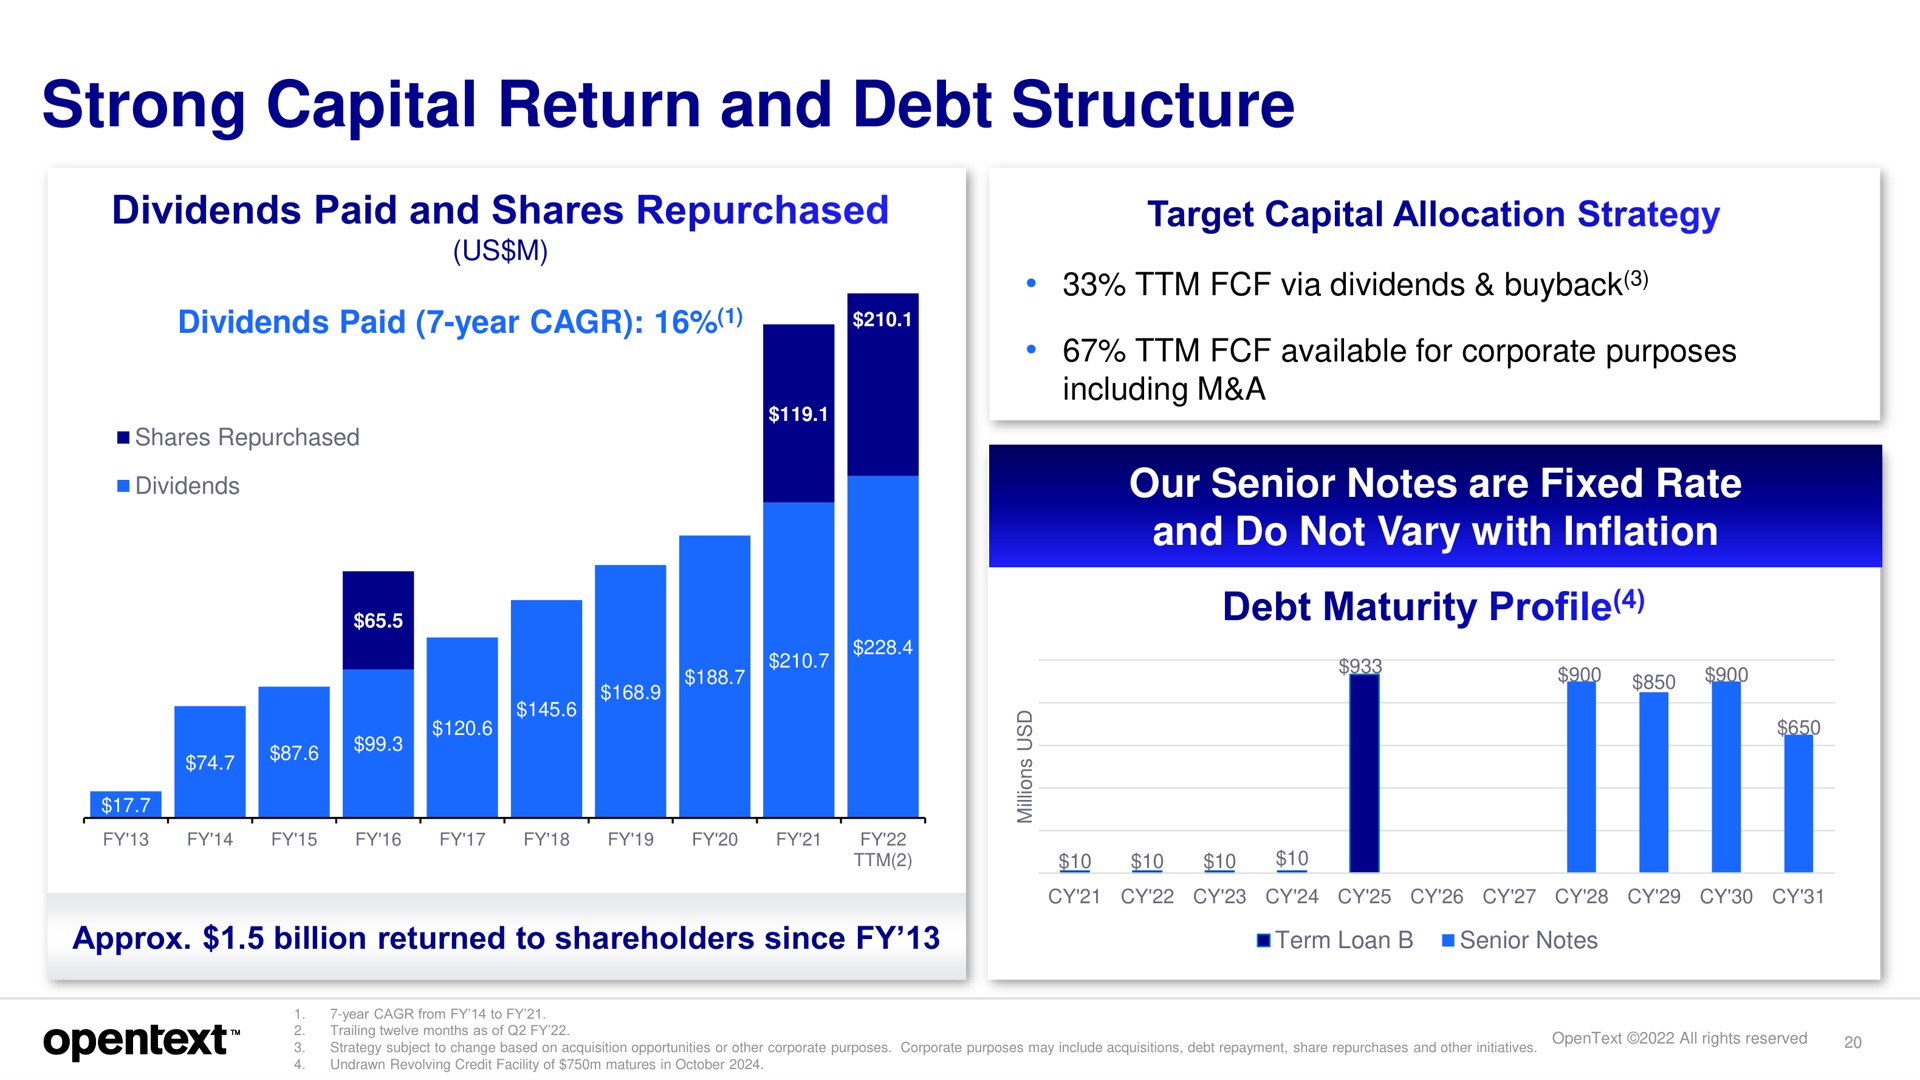 strong capital return and debt structure | OpenText